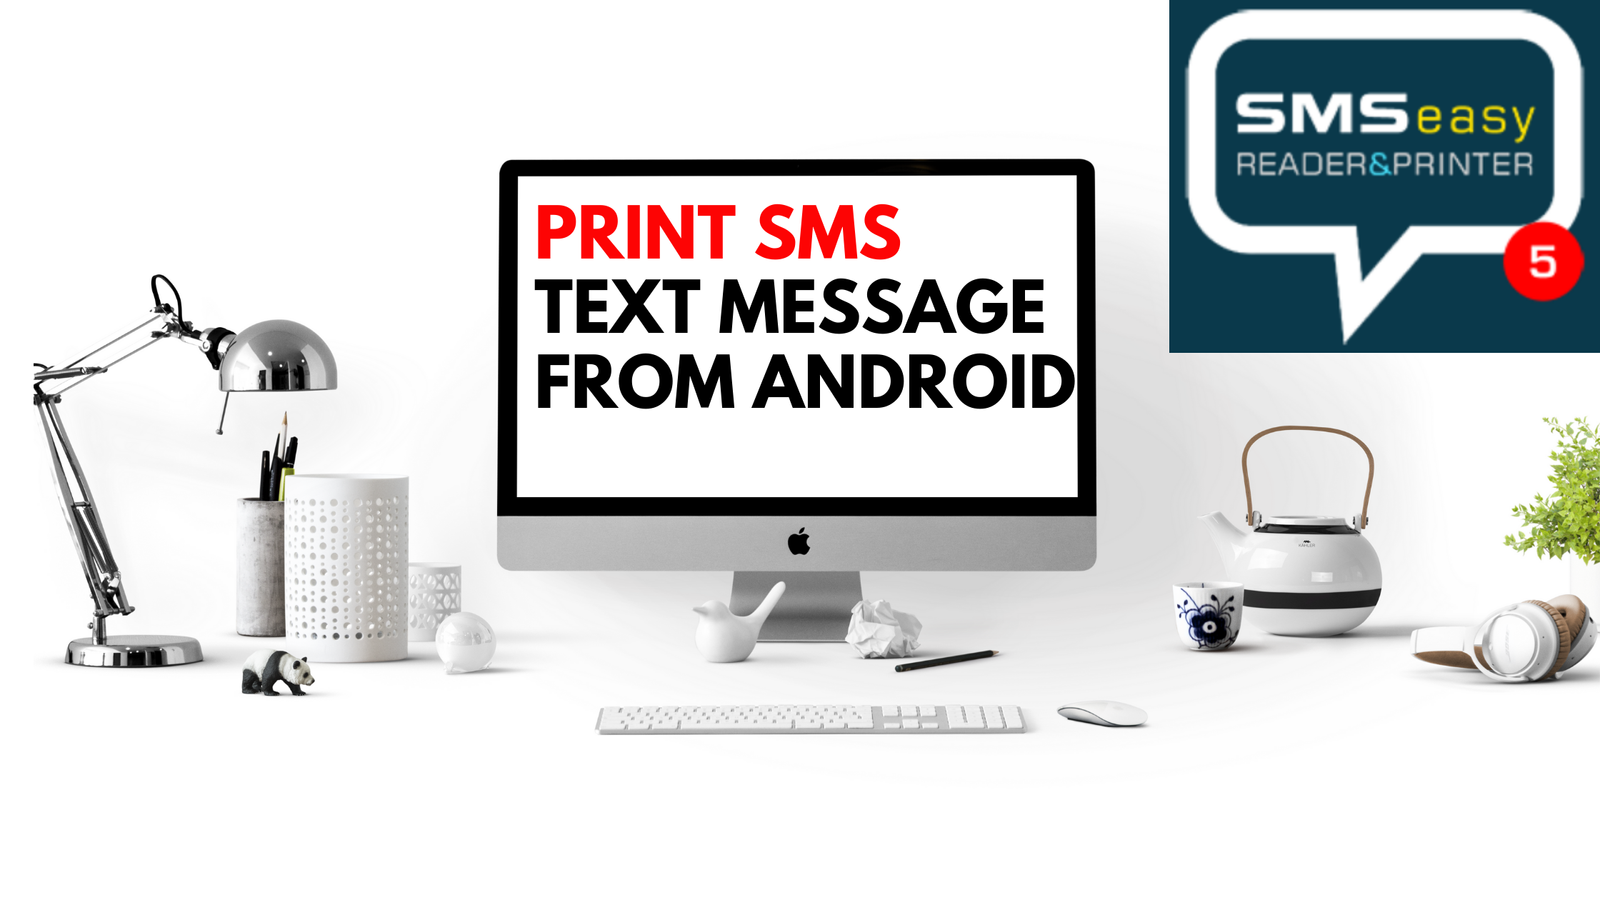 How to print SMS from android?